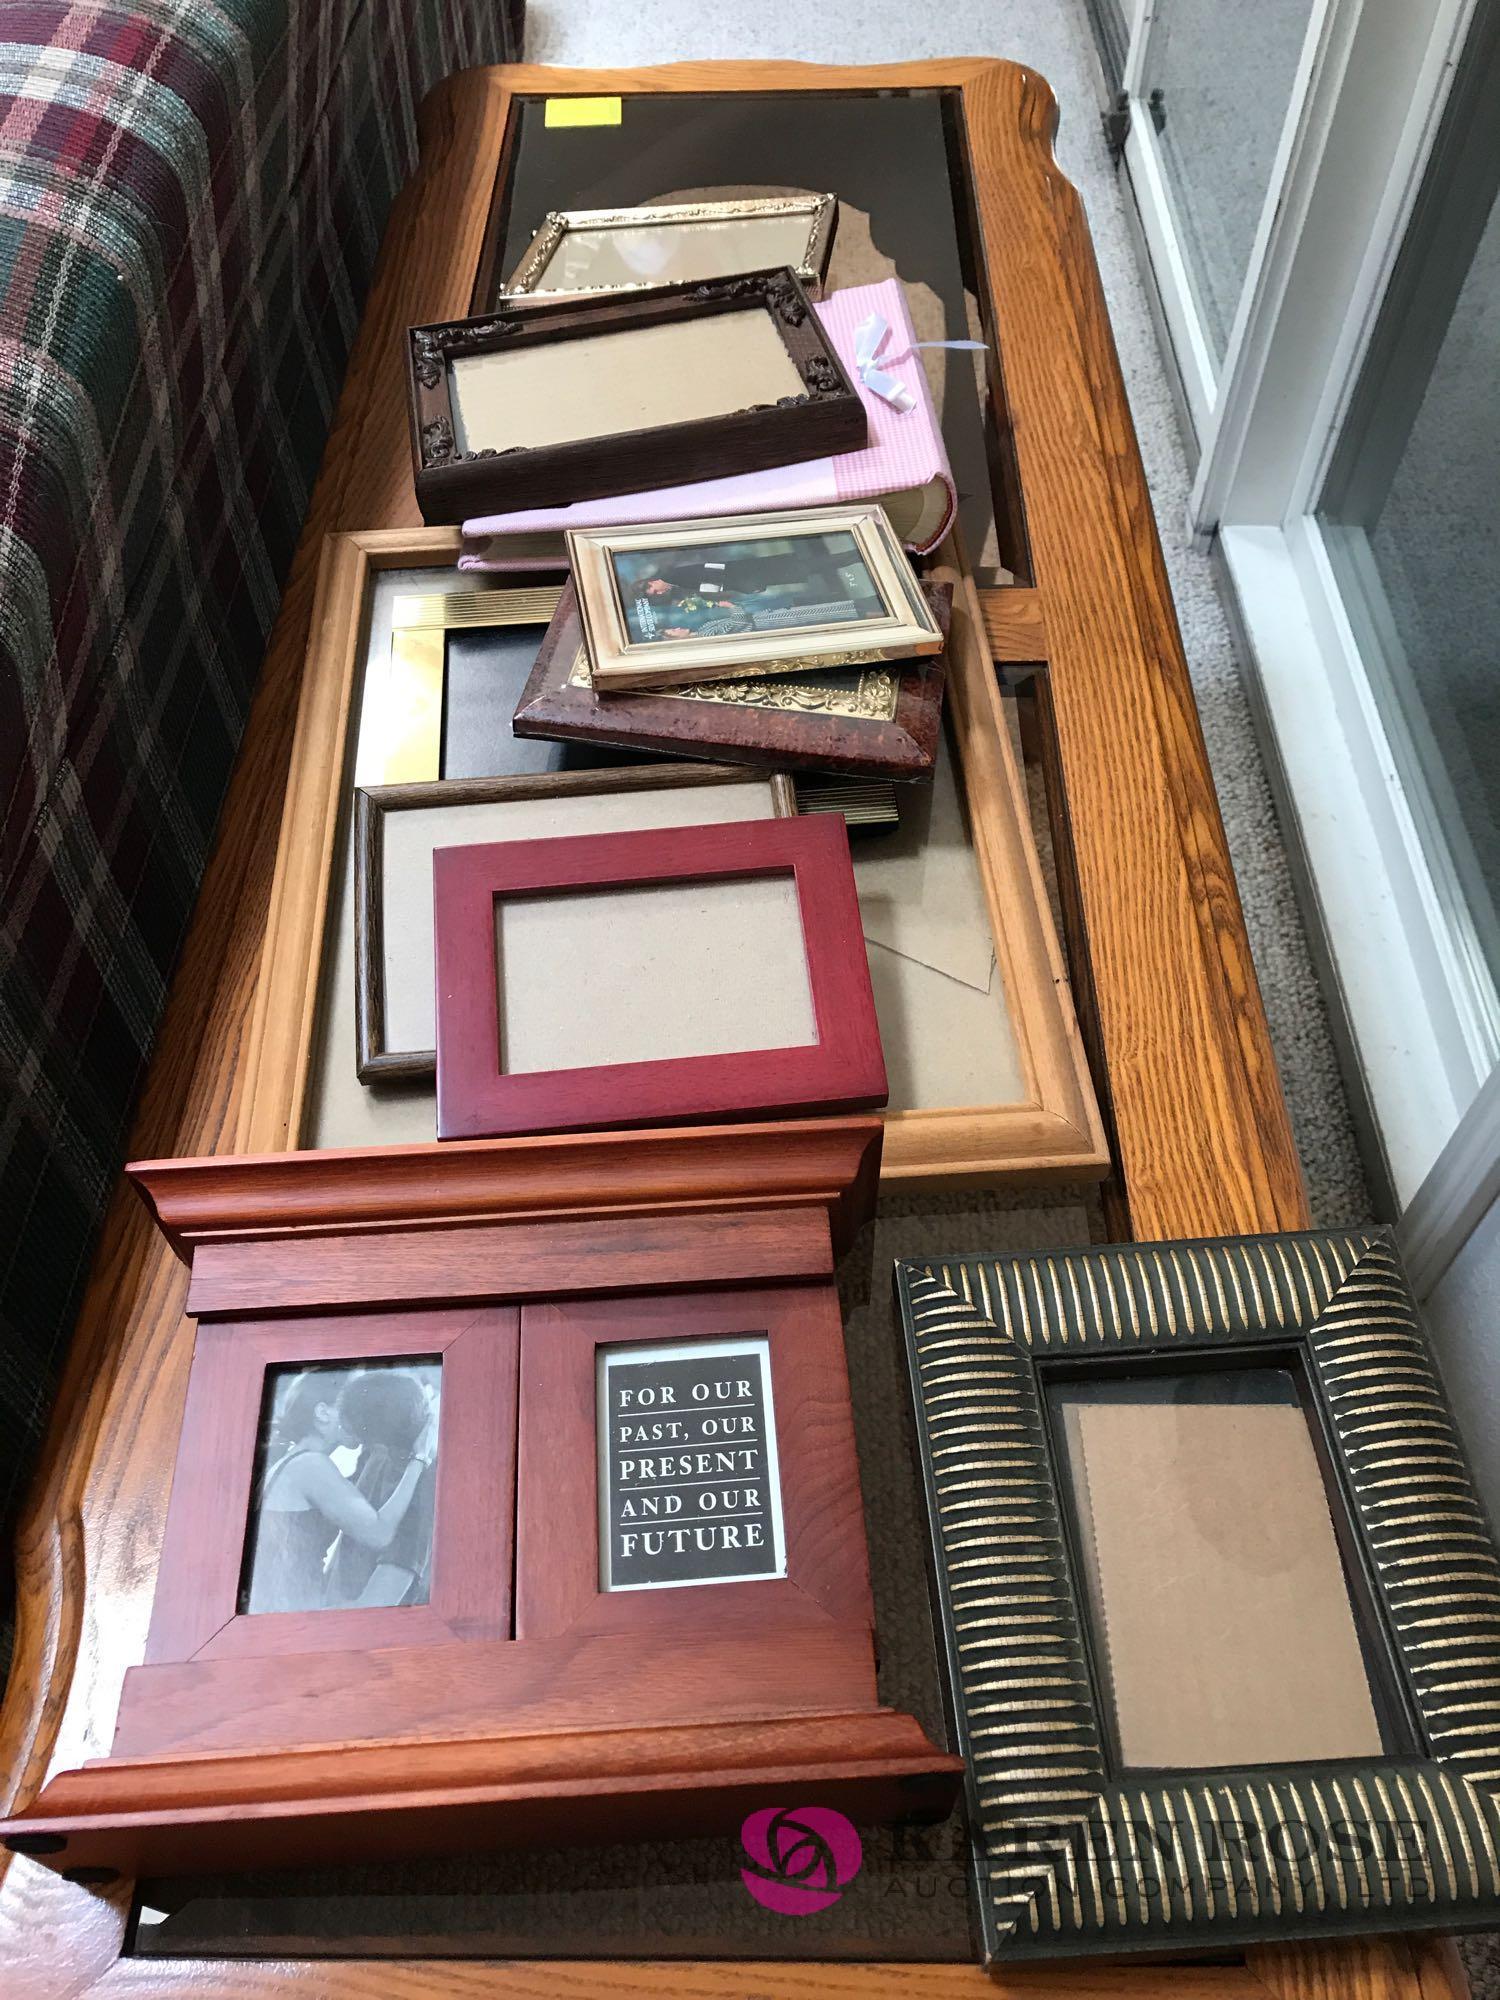 Lot of 10 picture frames